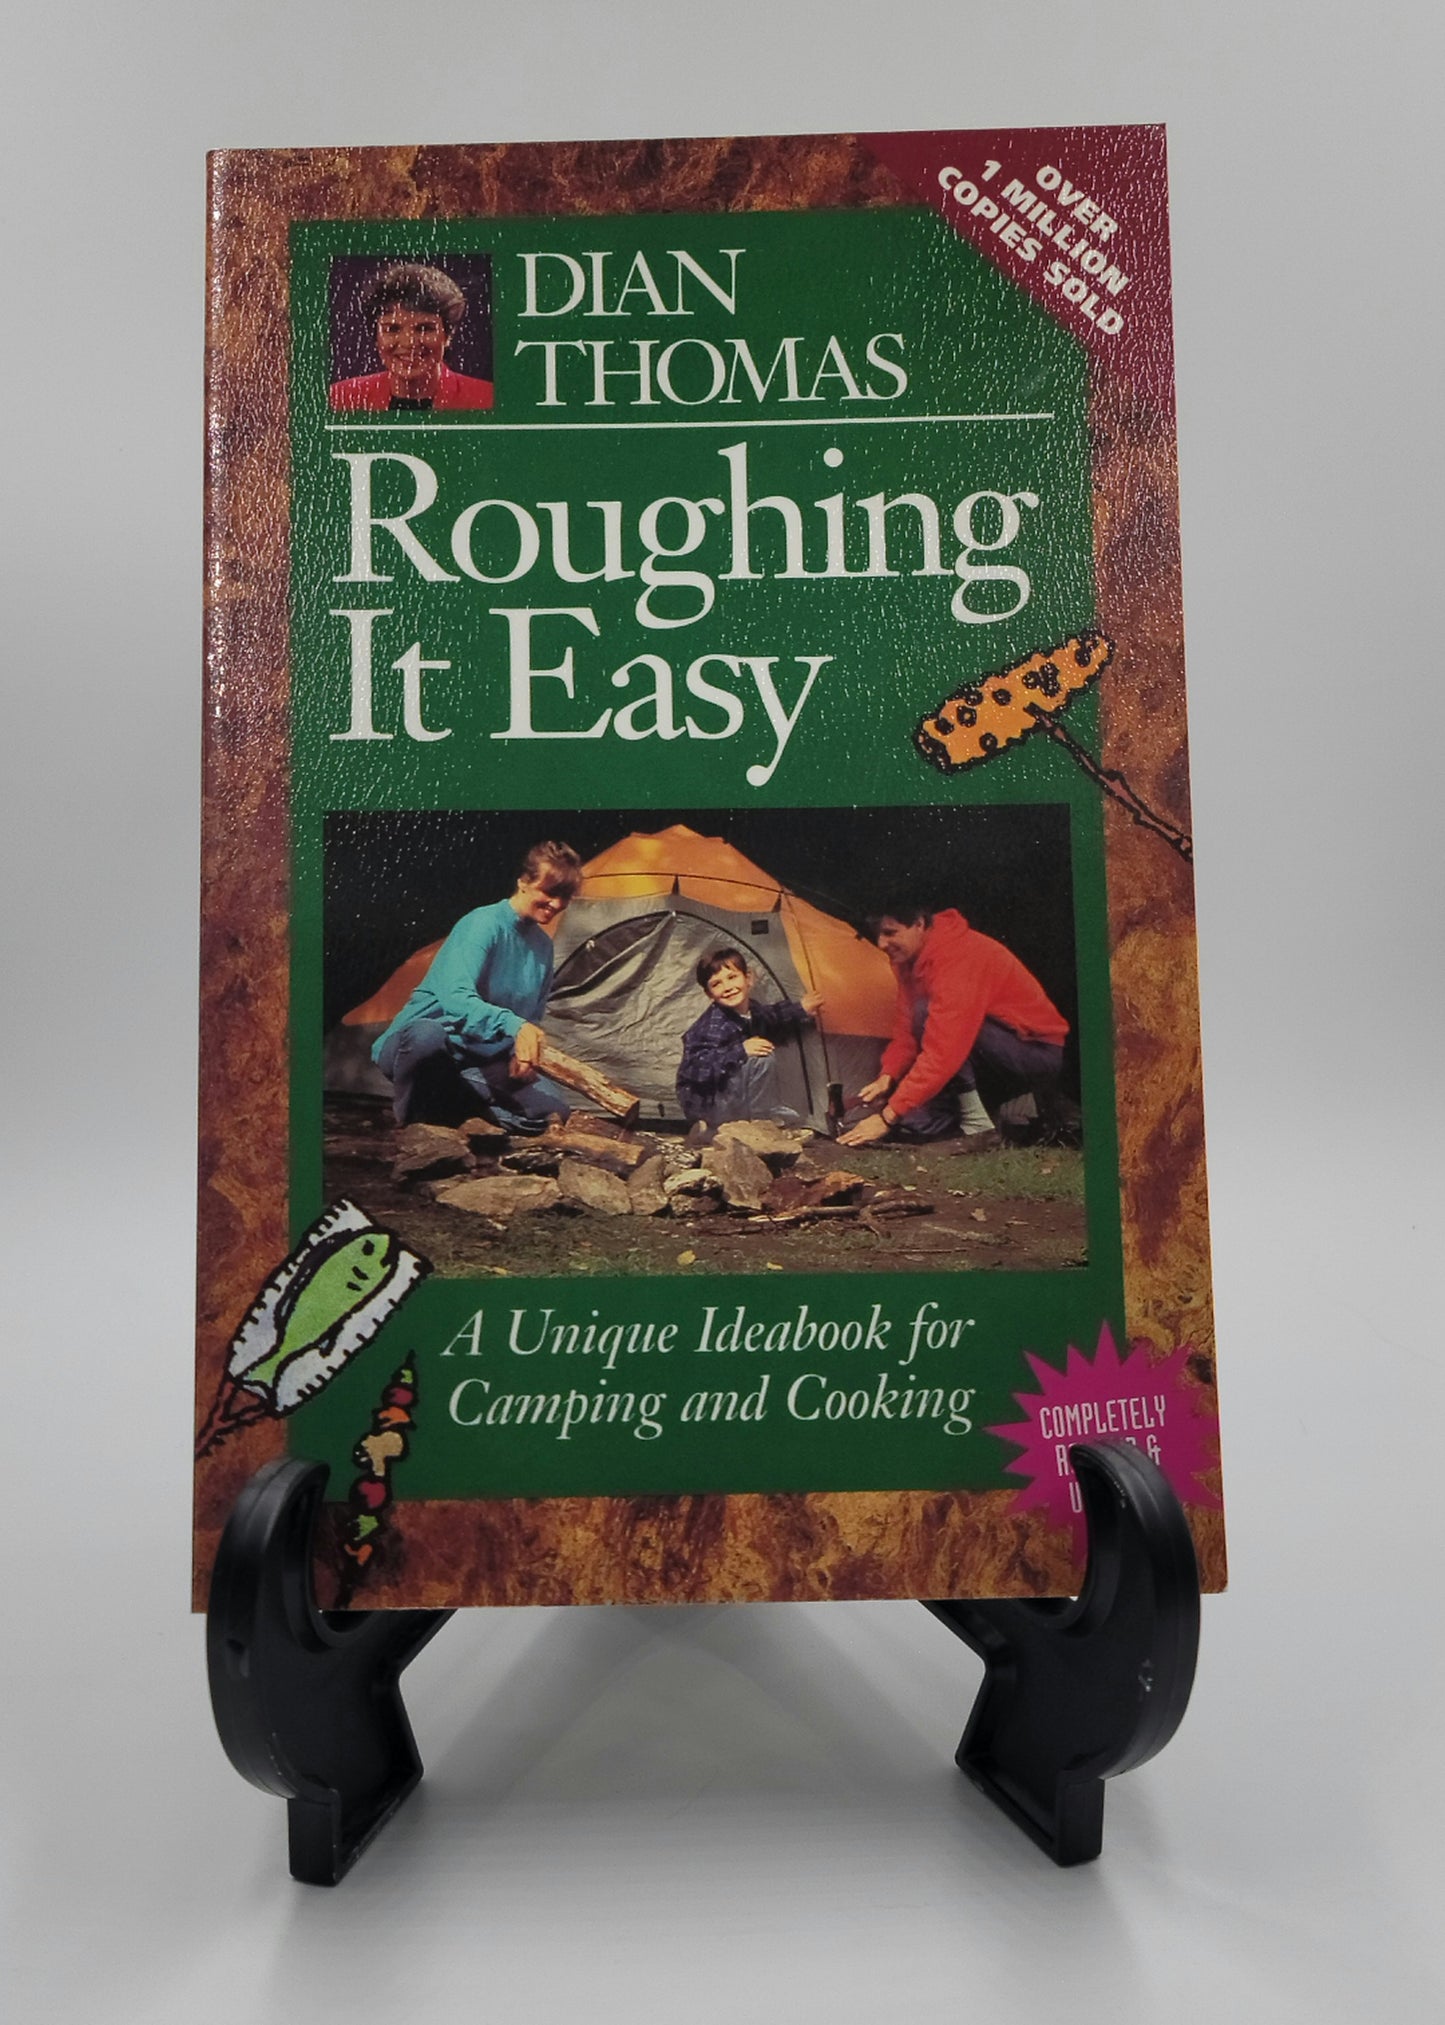 Roughing it Easy by Dian Thomas